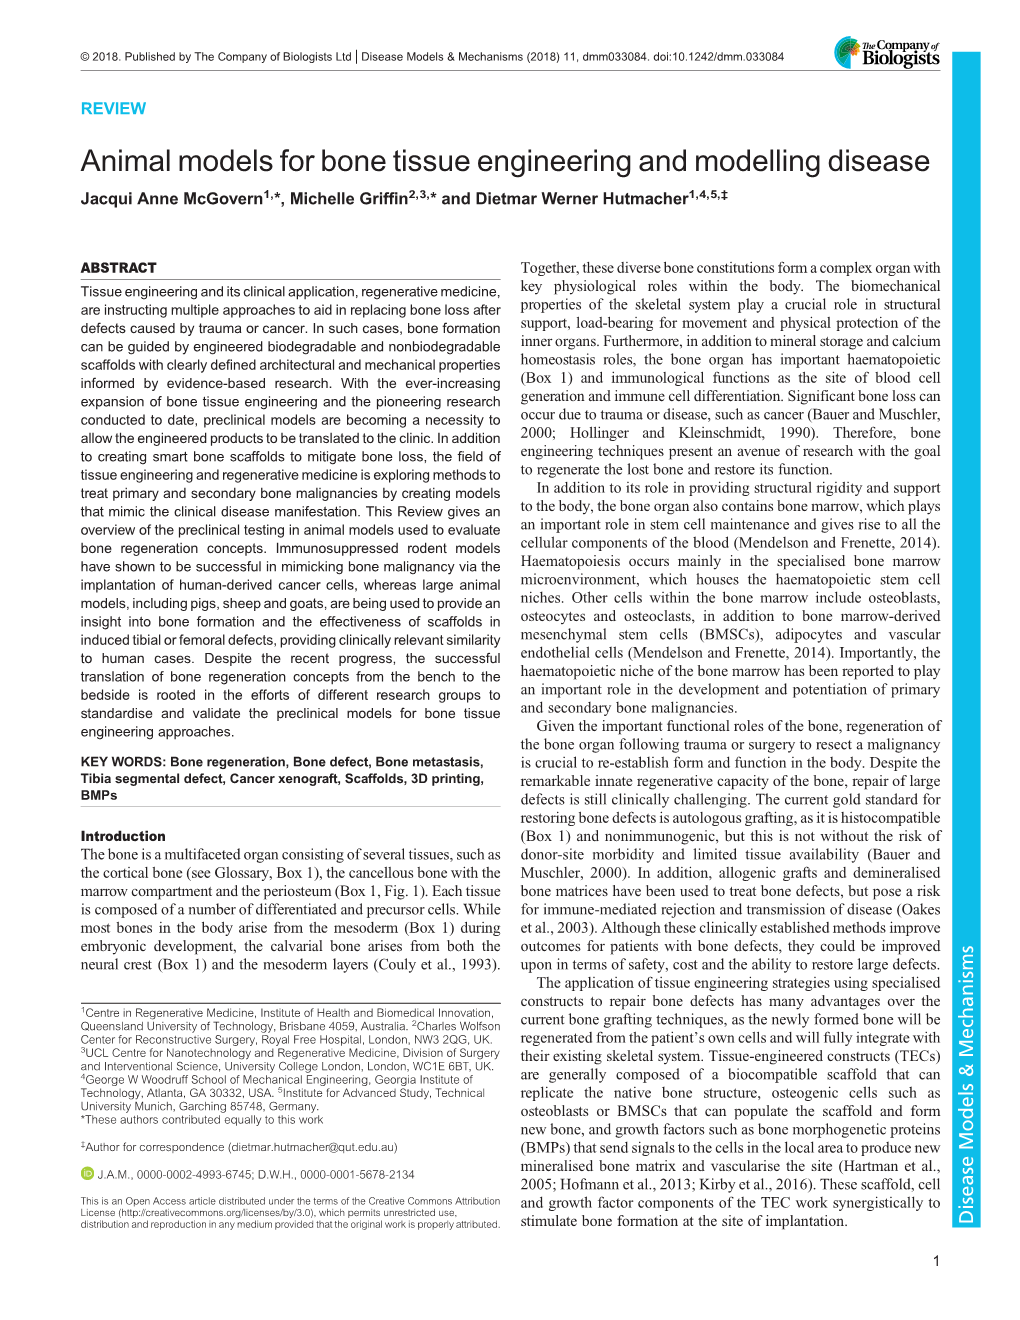 Animal Models for Bone Tissue Engineering and Modelling Disease Jacqui Anne Mcgovern1,*, Michelle Griffin2,3,* and Dietmar Werner Hutmacher1,4,5,‡